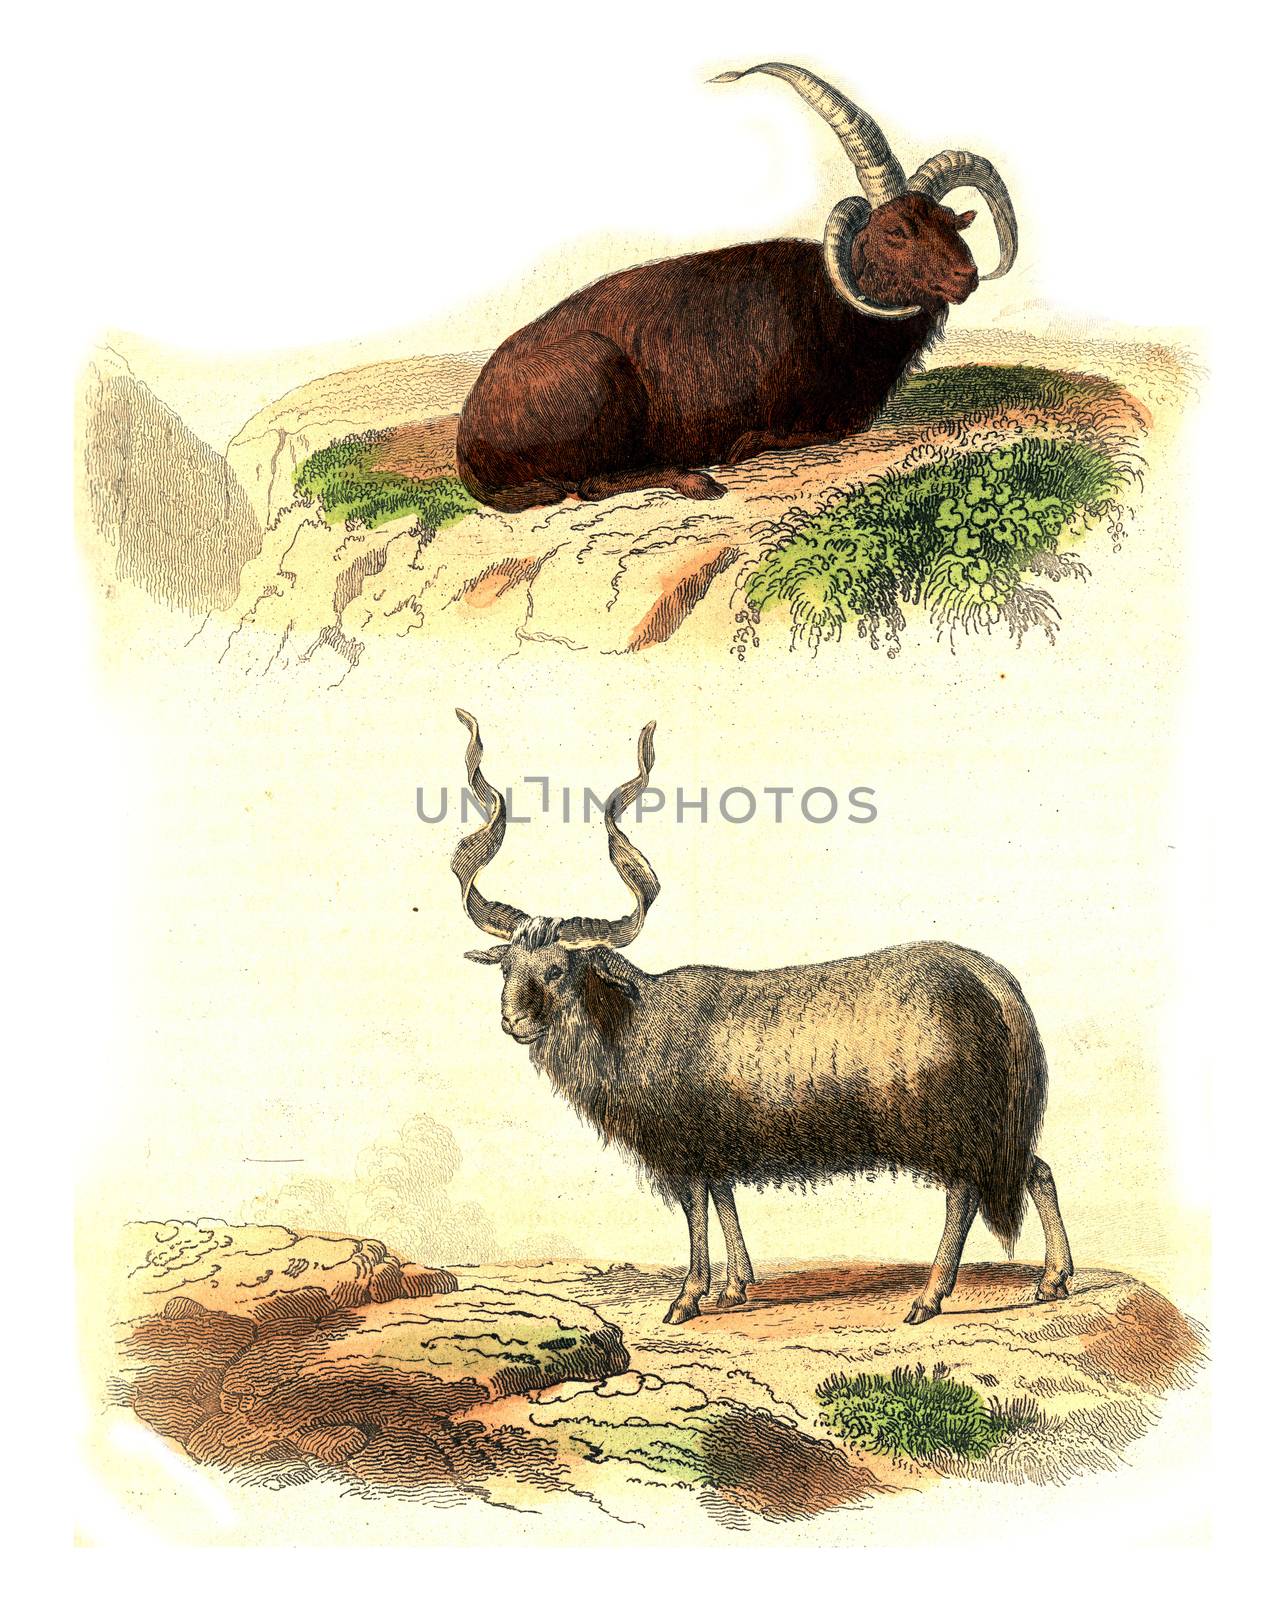 Aries of Iceland, Aries of Walachia, vintage engraved illustration. From Buffon Complete Work.
